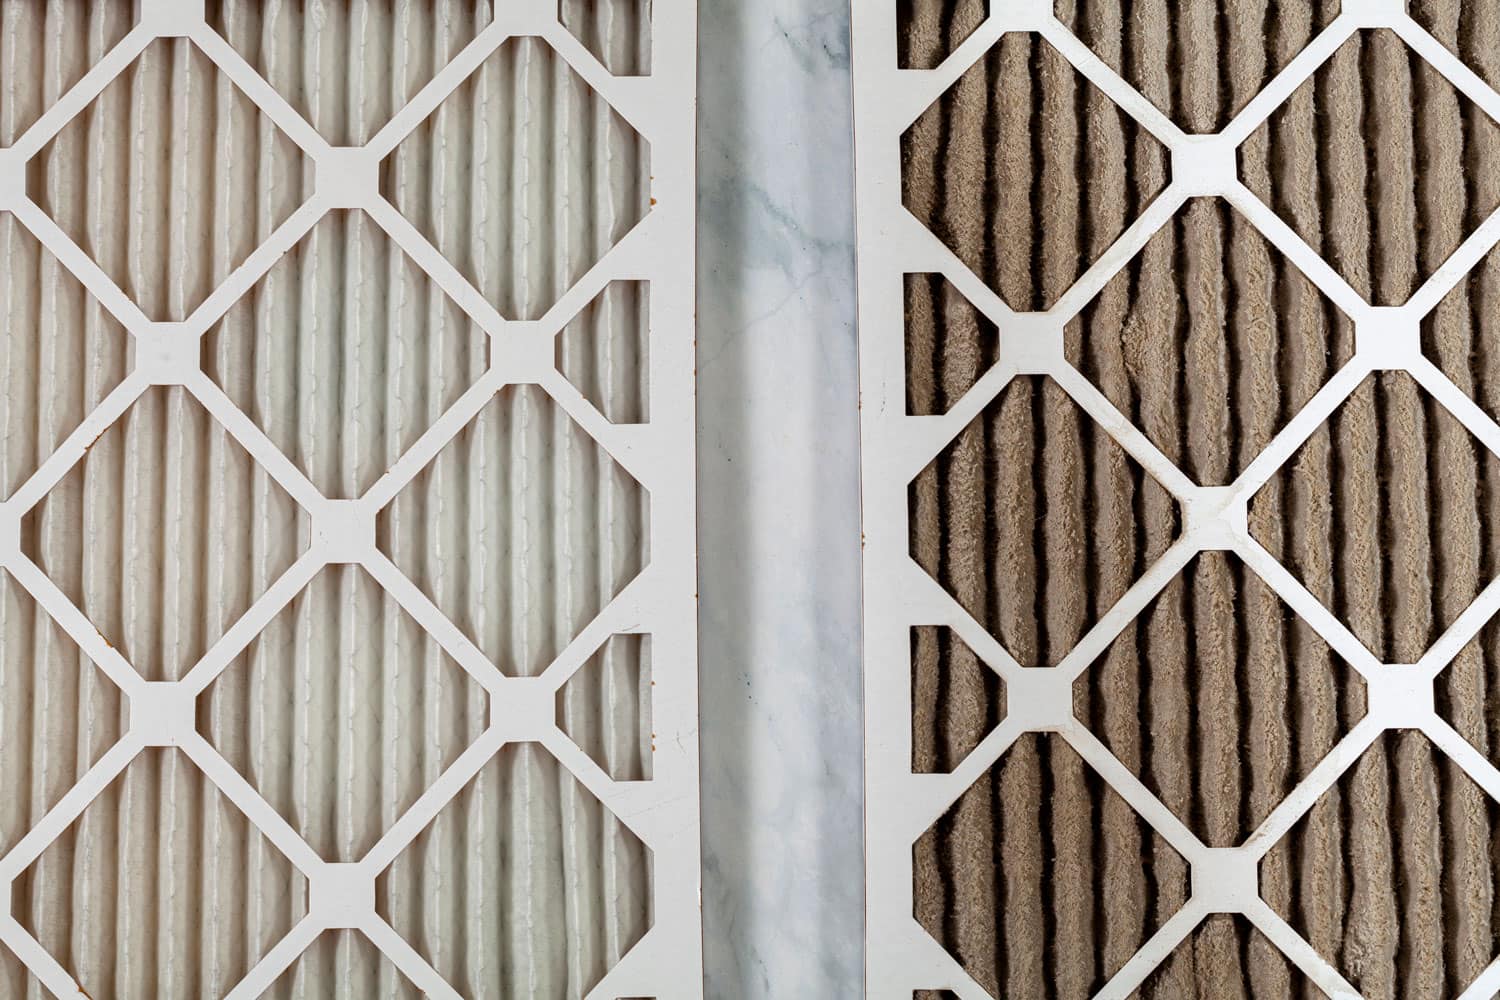 Two furnace air filters comparison of new and used